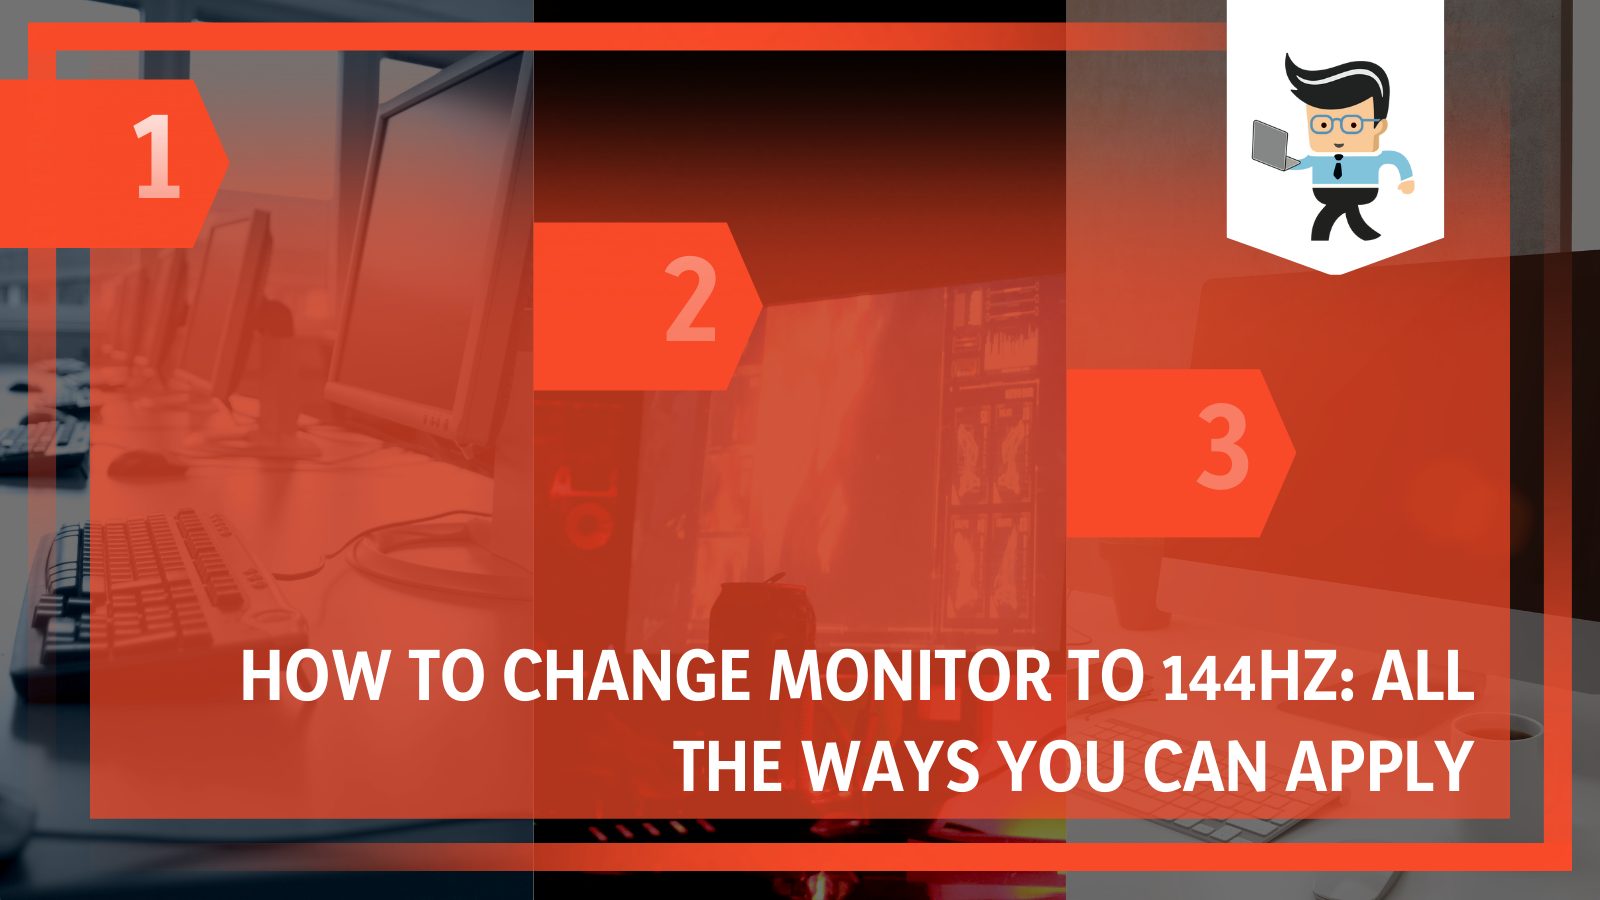 How To Change Monitor to 144Hz